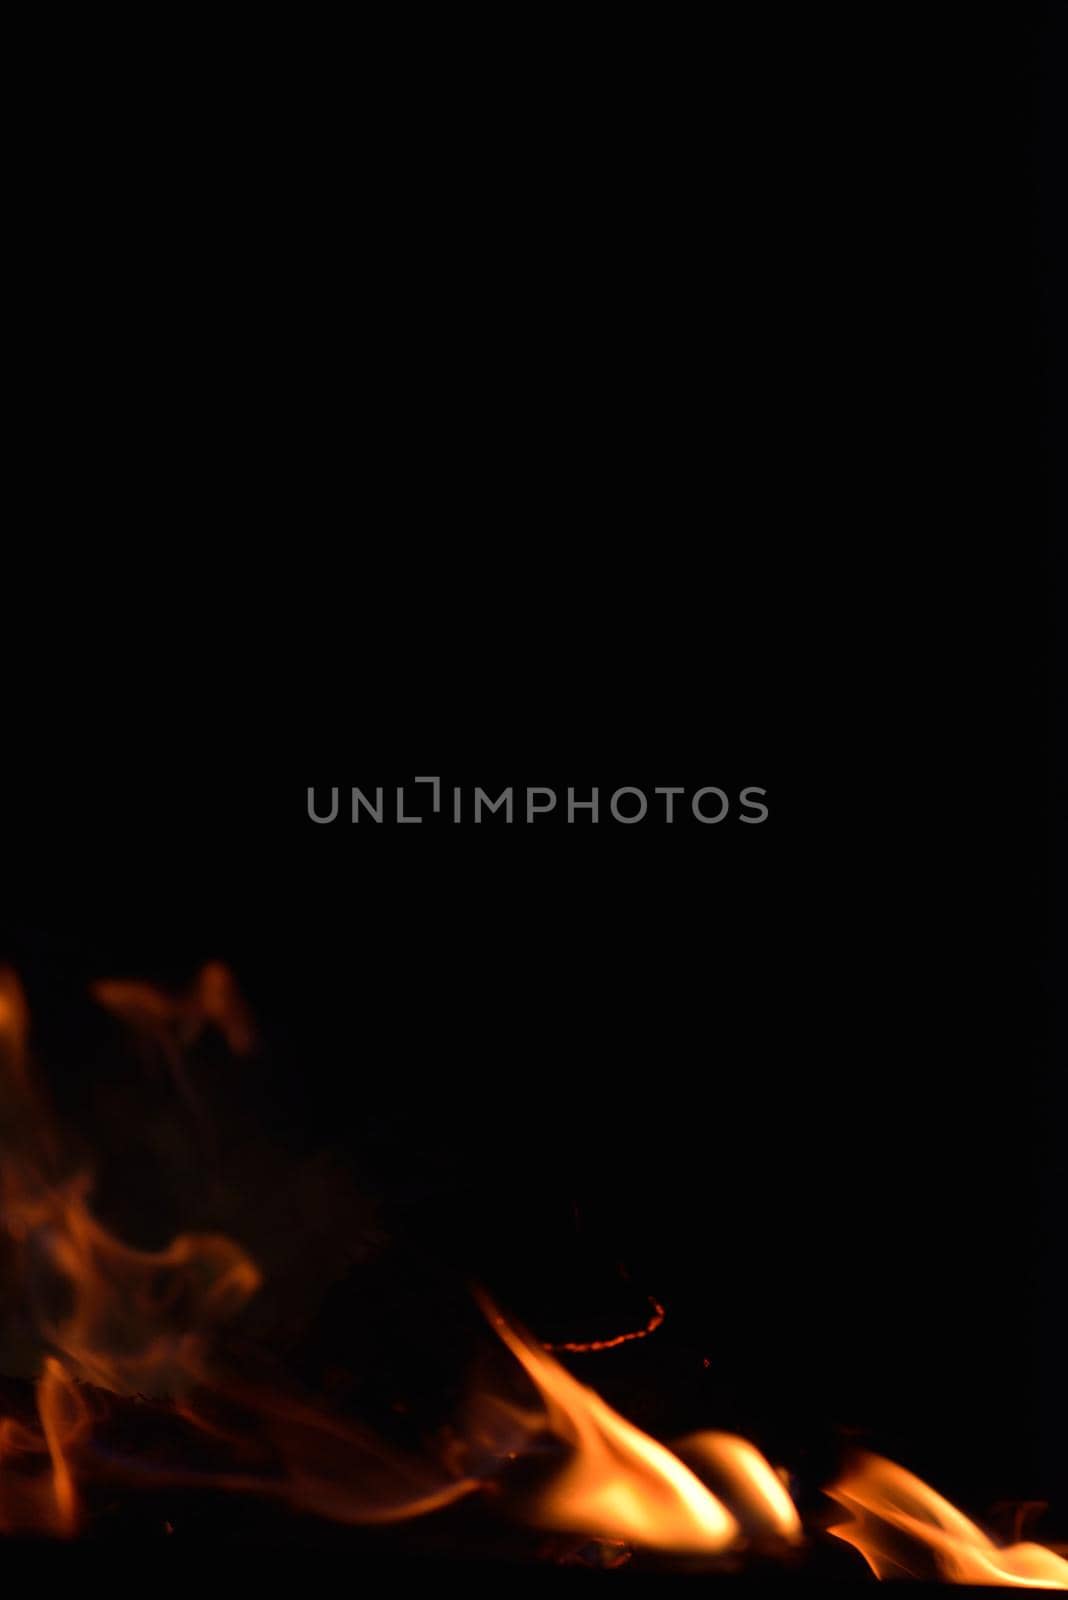 Fire flames  design isoleted on black background